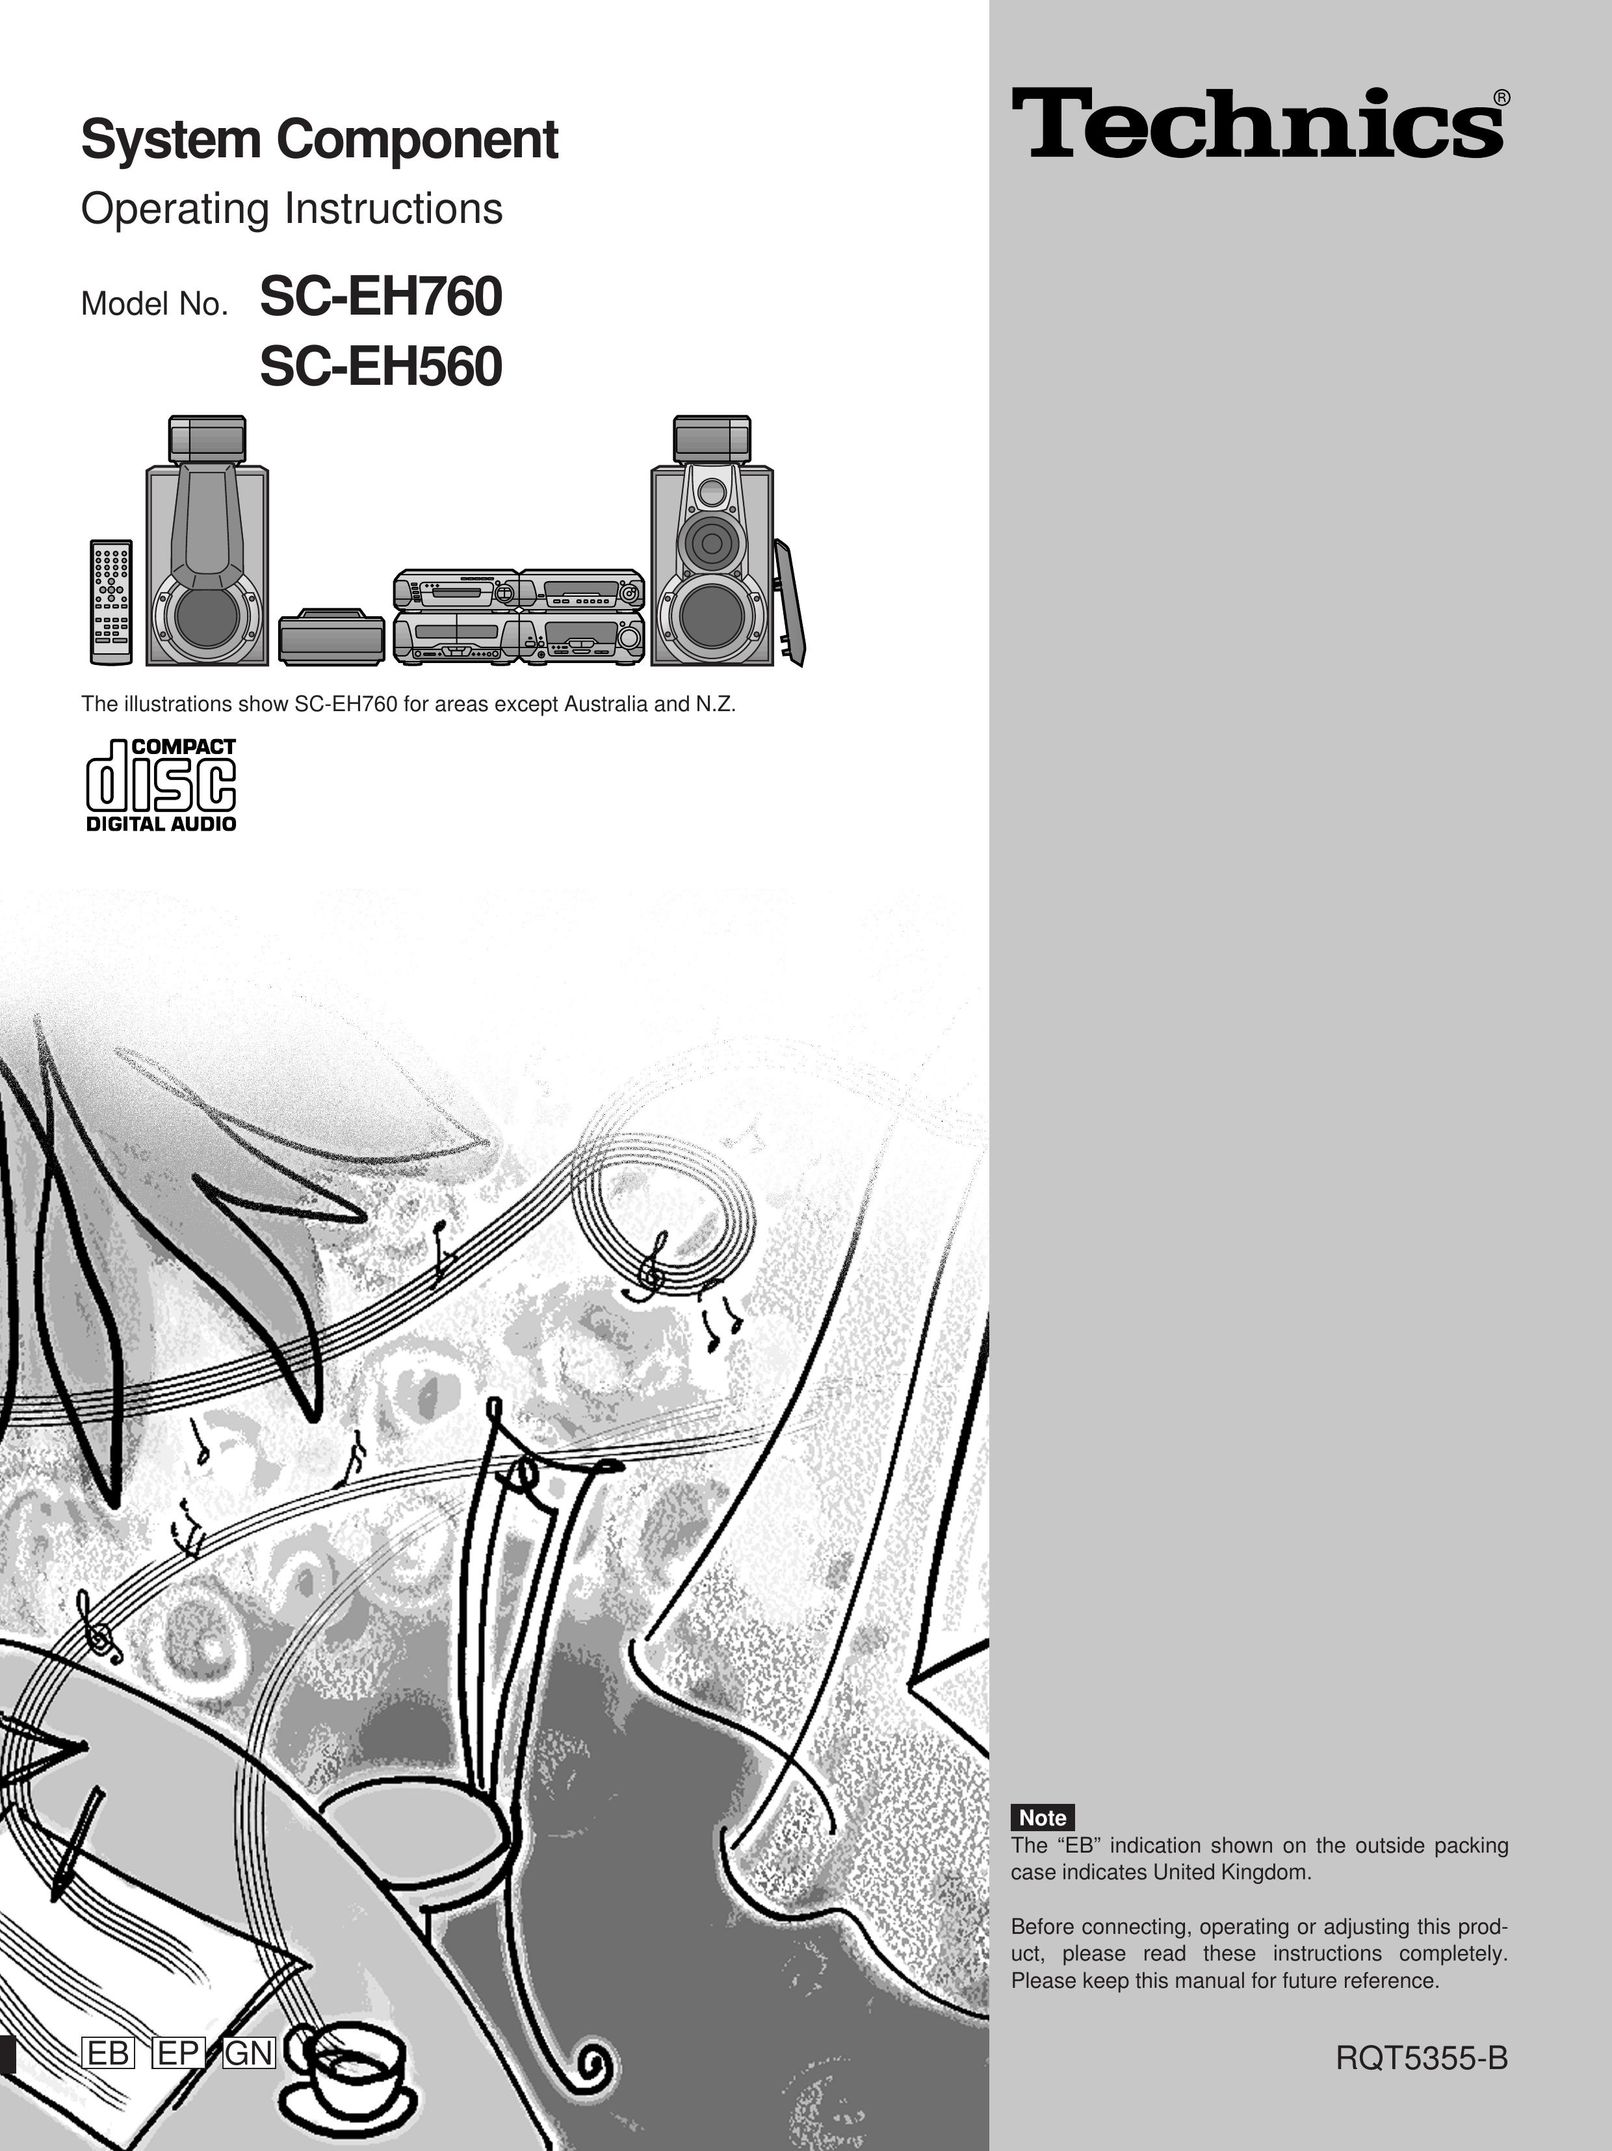 Technics SC-EH560 Home Theater System User Manual